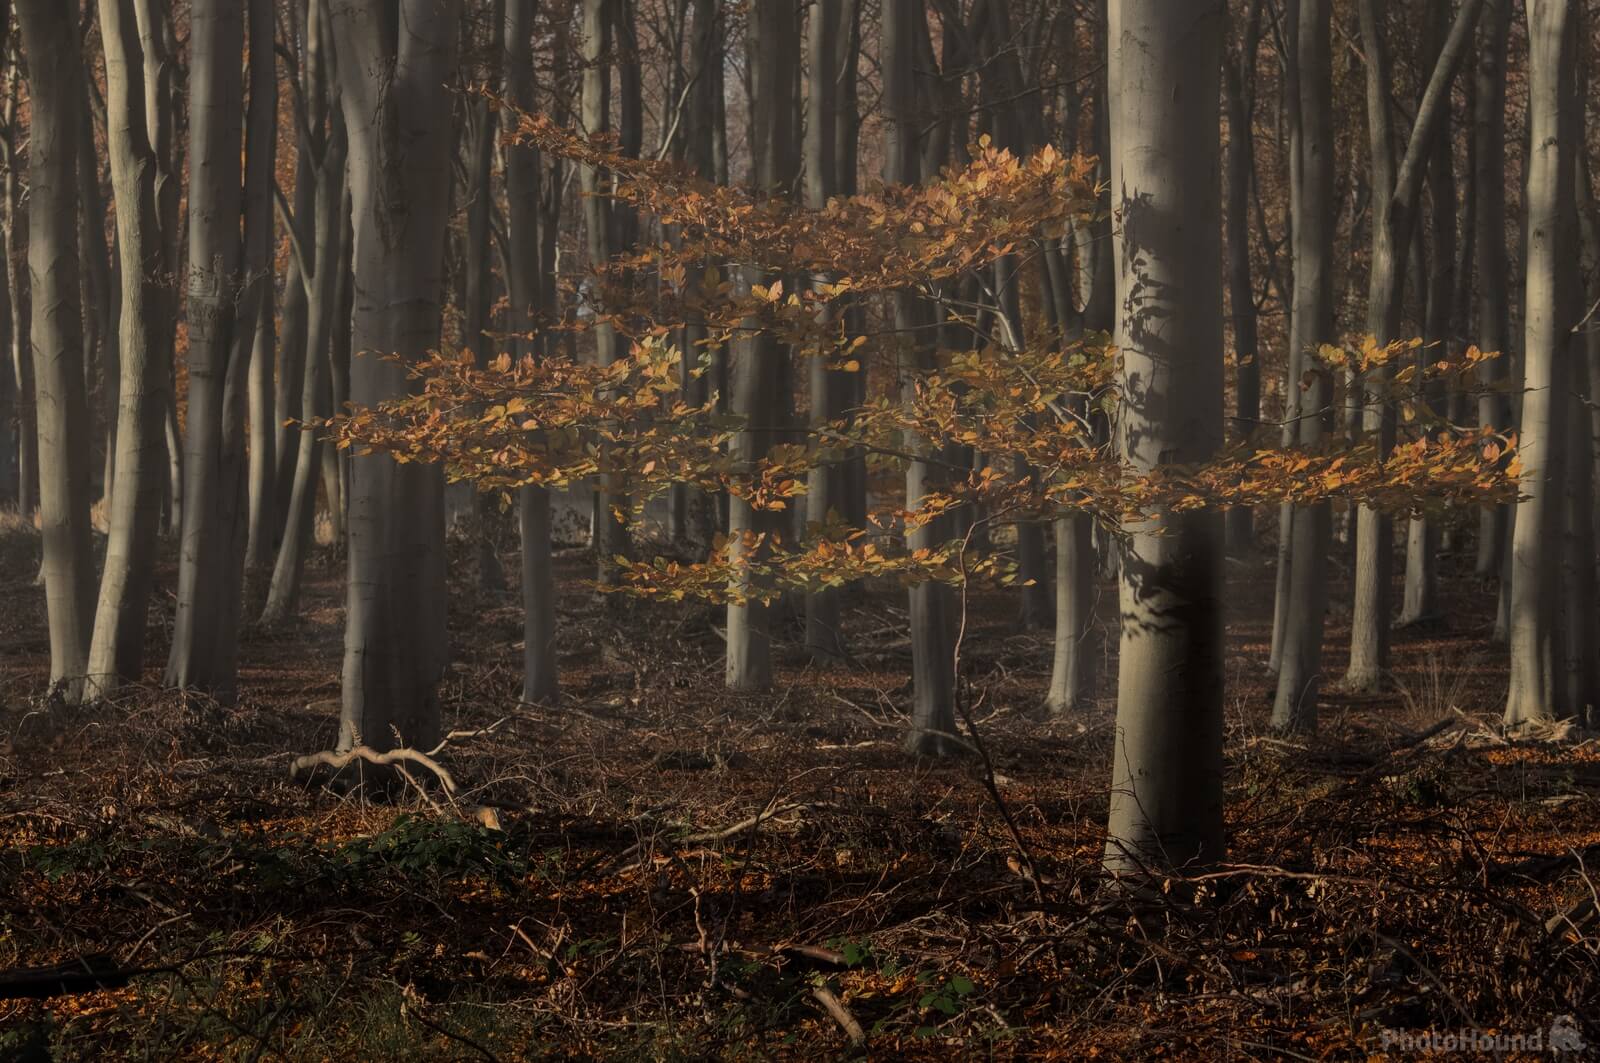 Image of Bedford Purlieus Woods by Andy Paterson